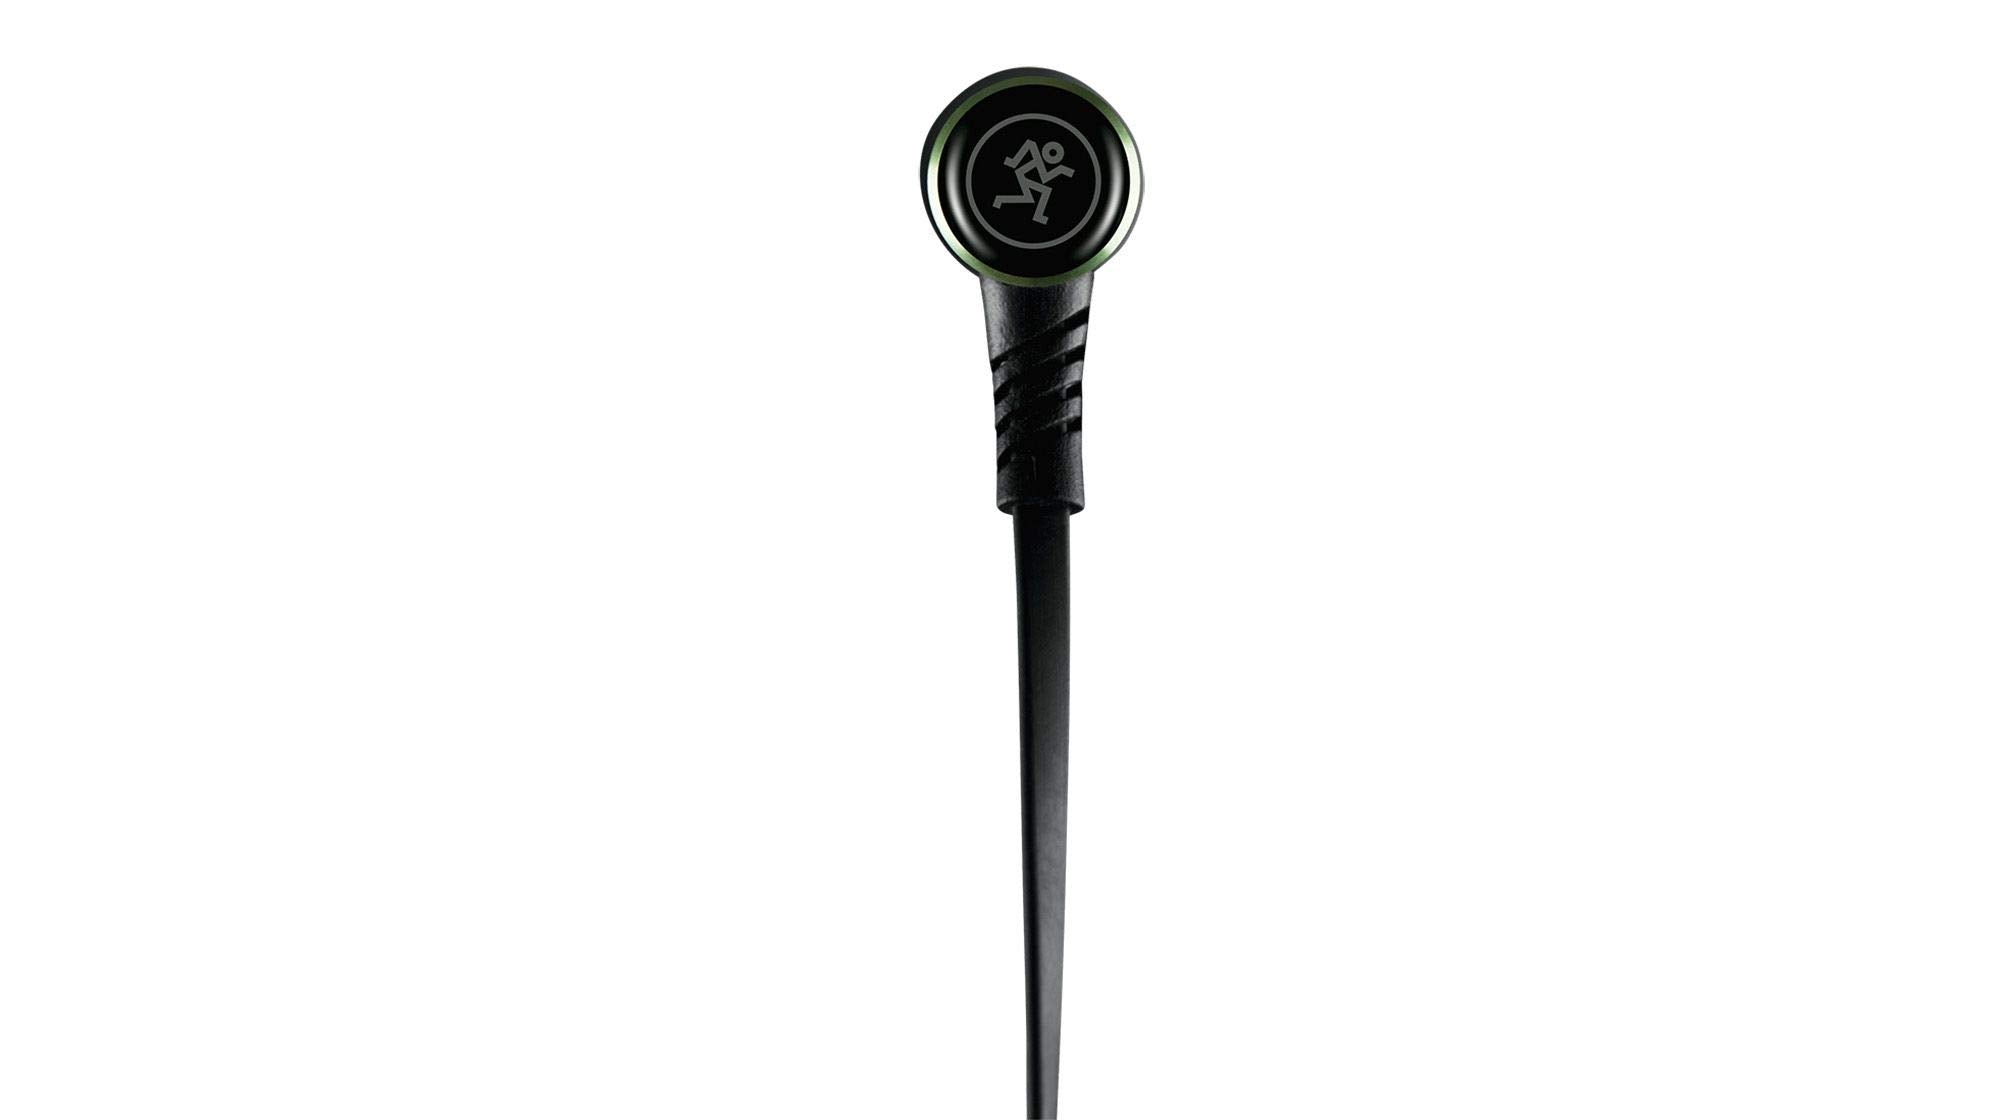 Mackie CR-BUDS - Professional Fit Earphones High Performance with Mic and Control